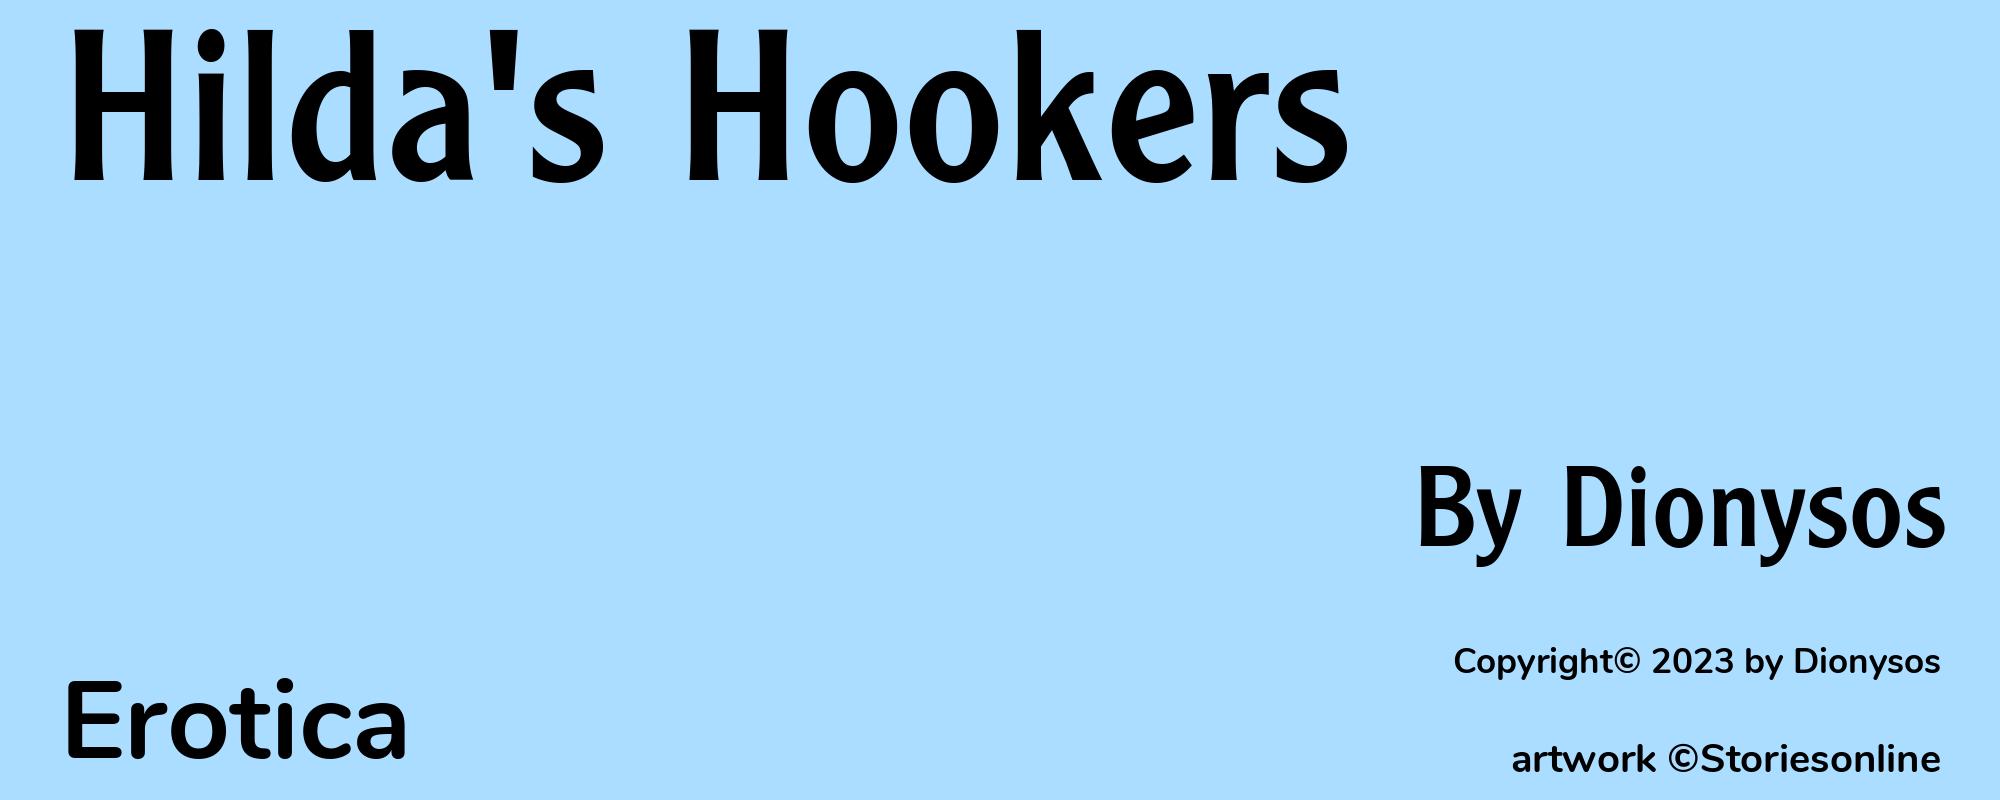 Hilda's Hookers - Cover